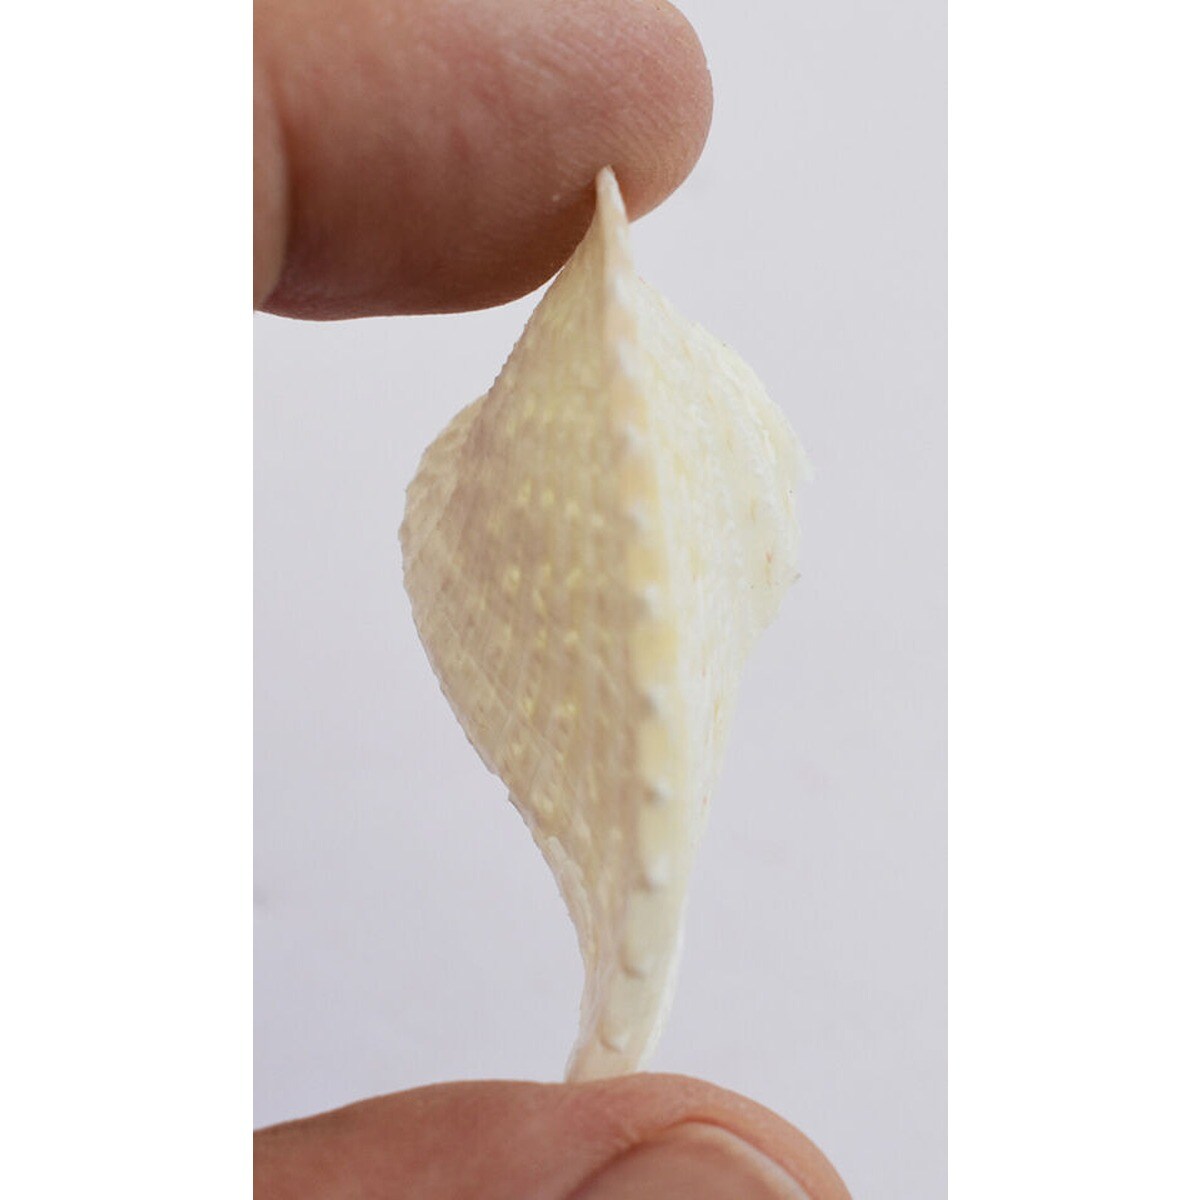 2 1/4 Inches Aesthetic Galore Cockle Shells